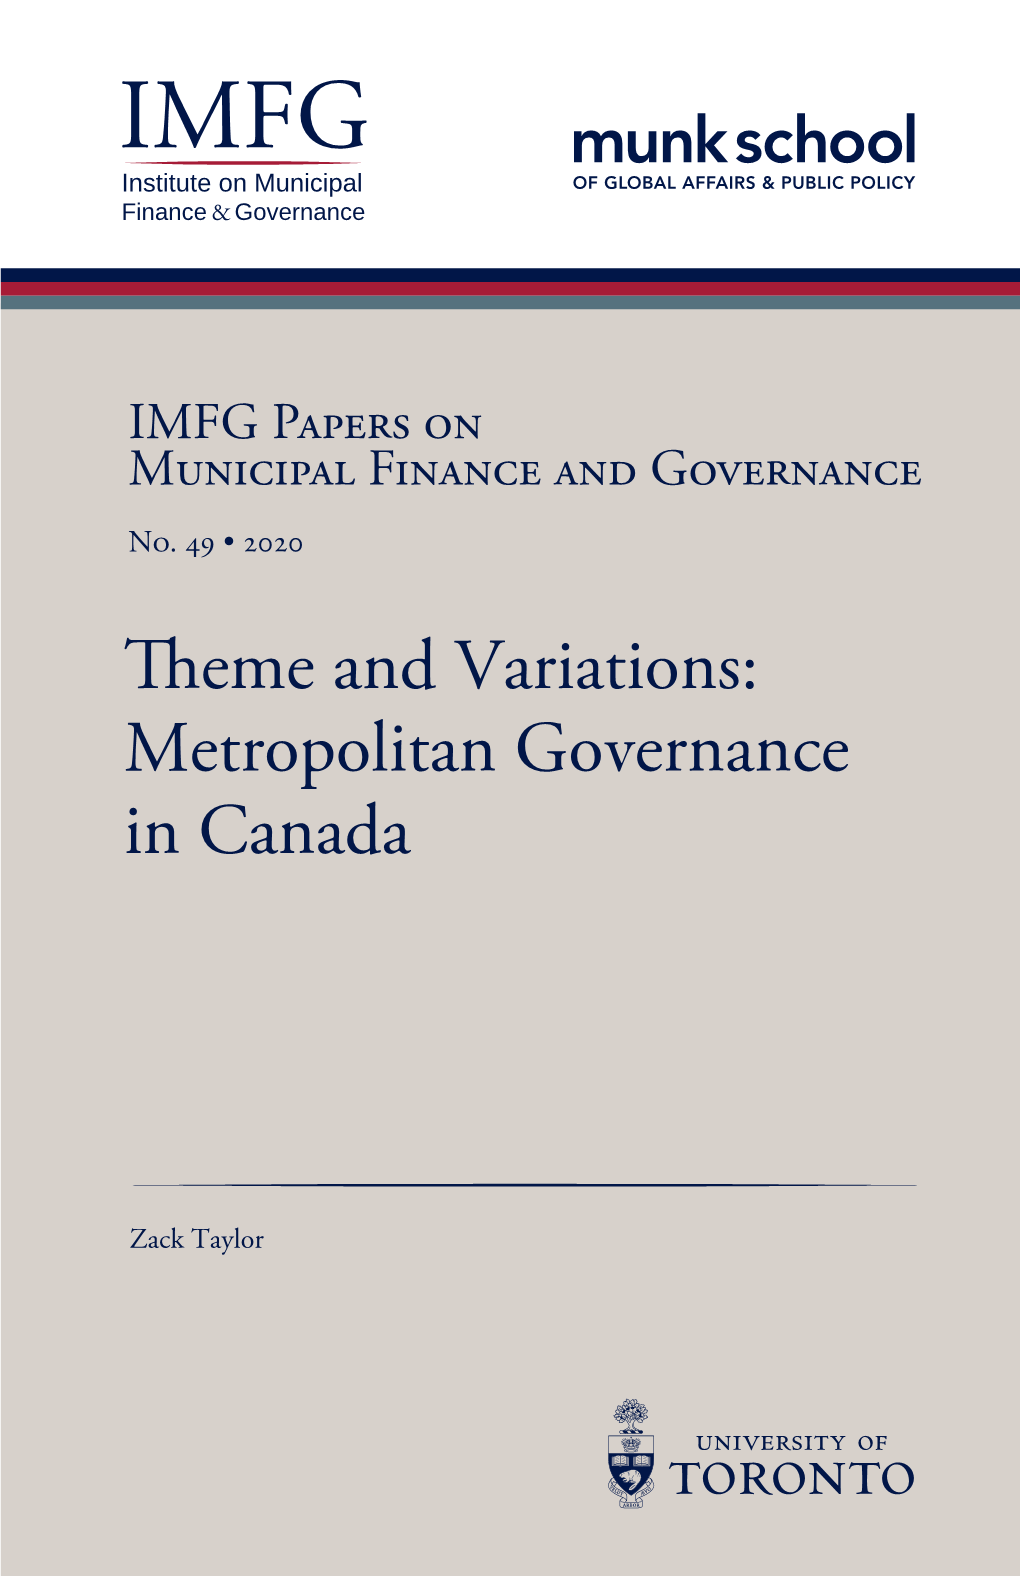 Eme and Variations: Metropolitan Governance in Canada